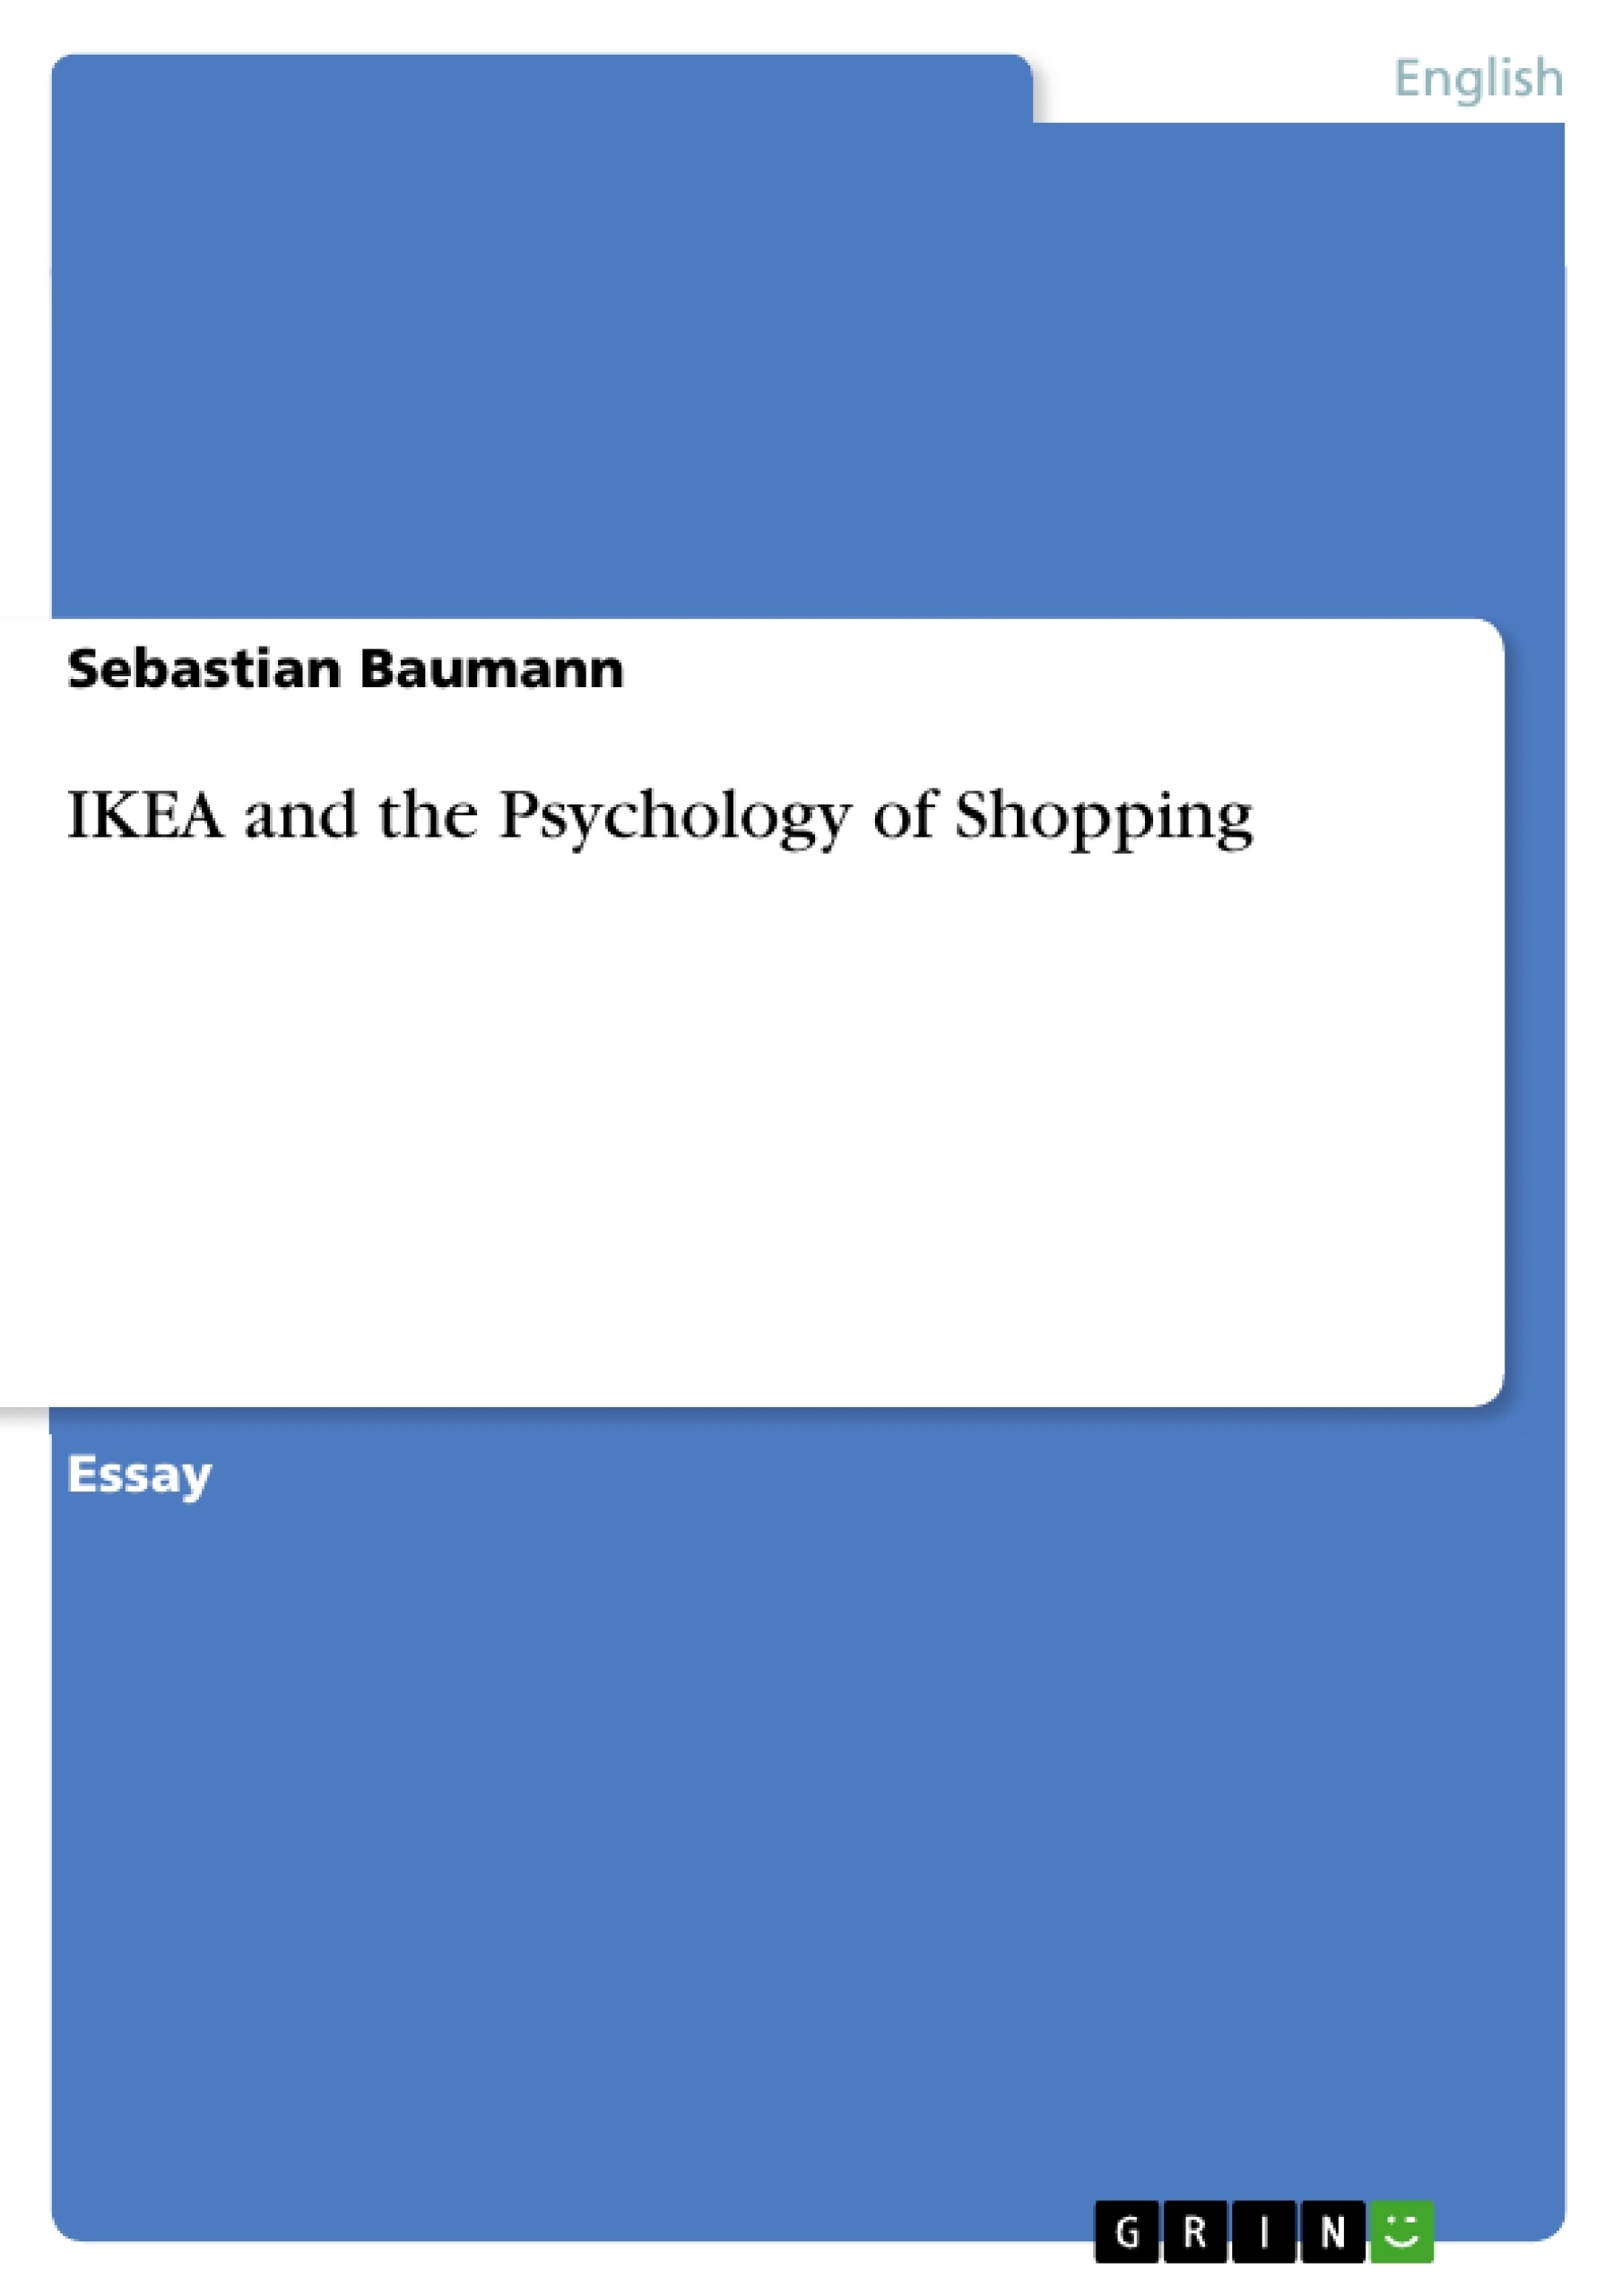 Title: IKEA and the Psychology of Shopping